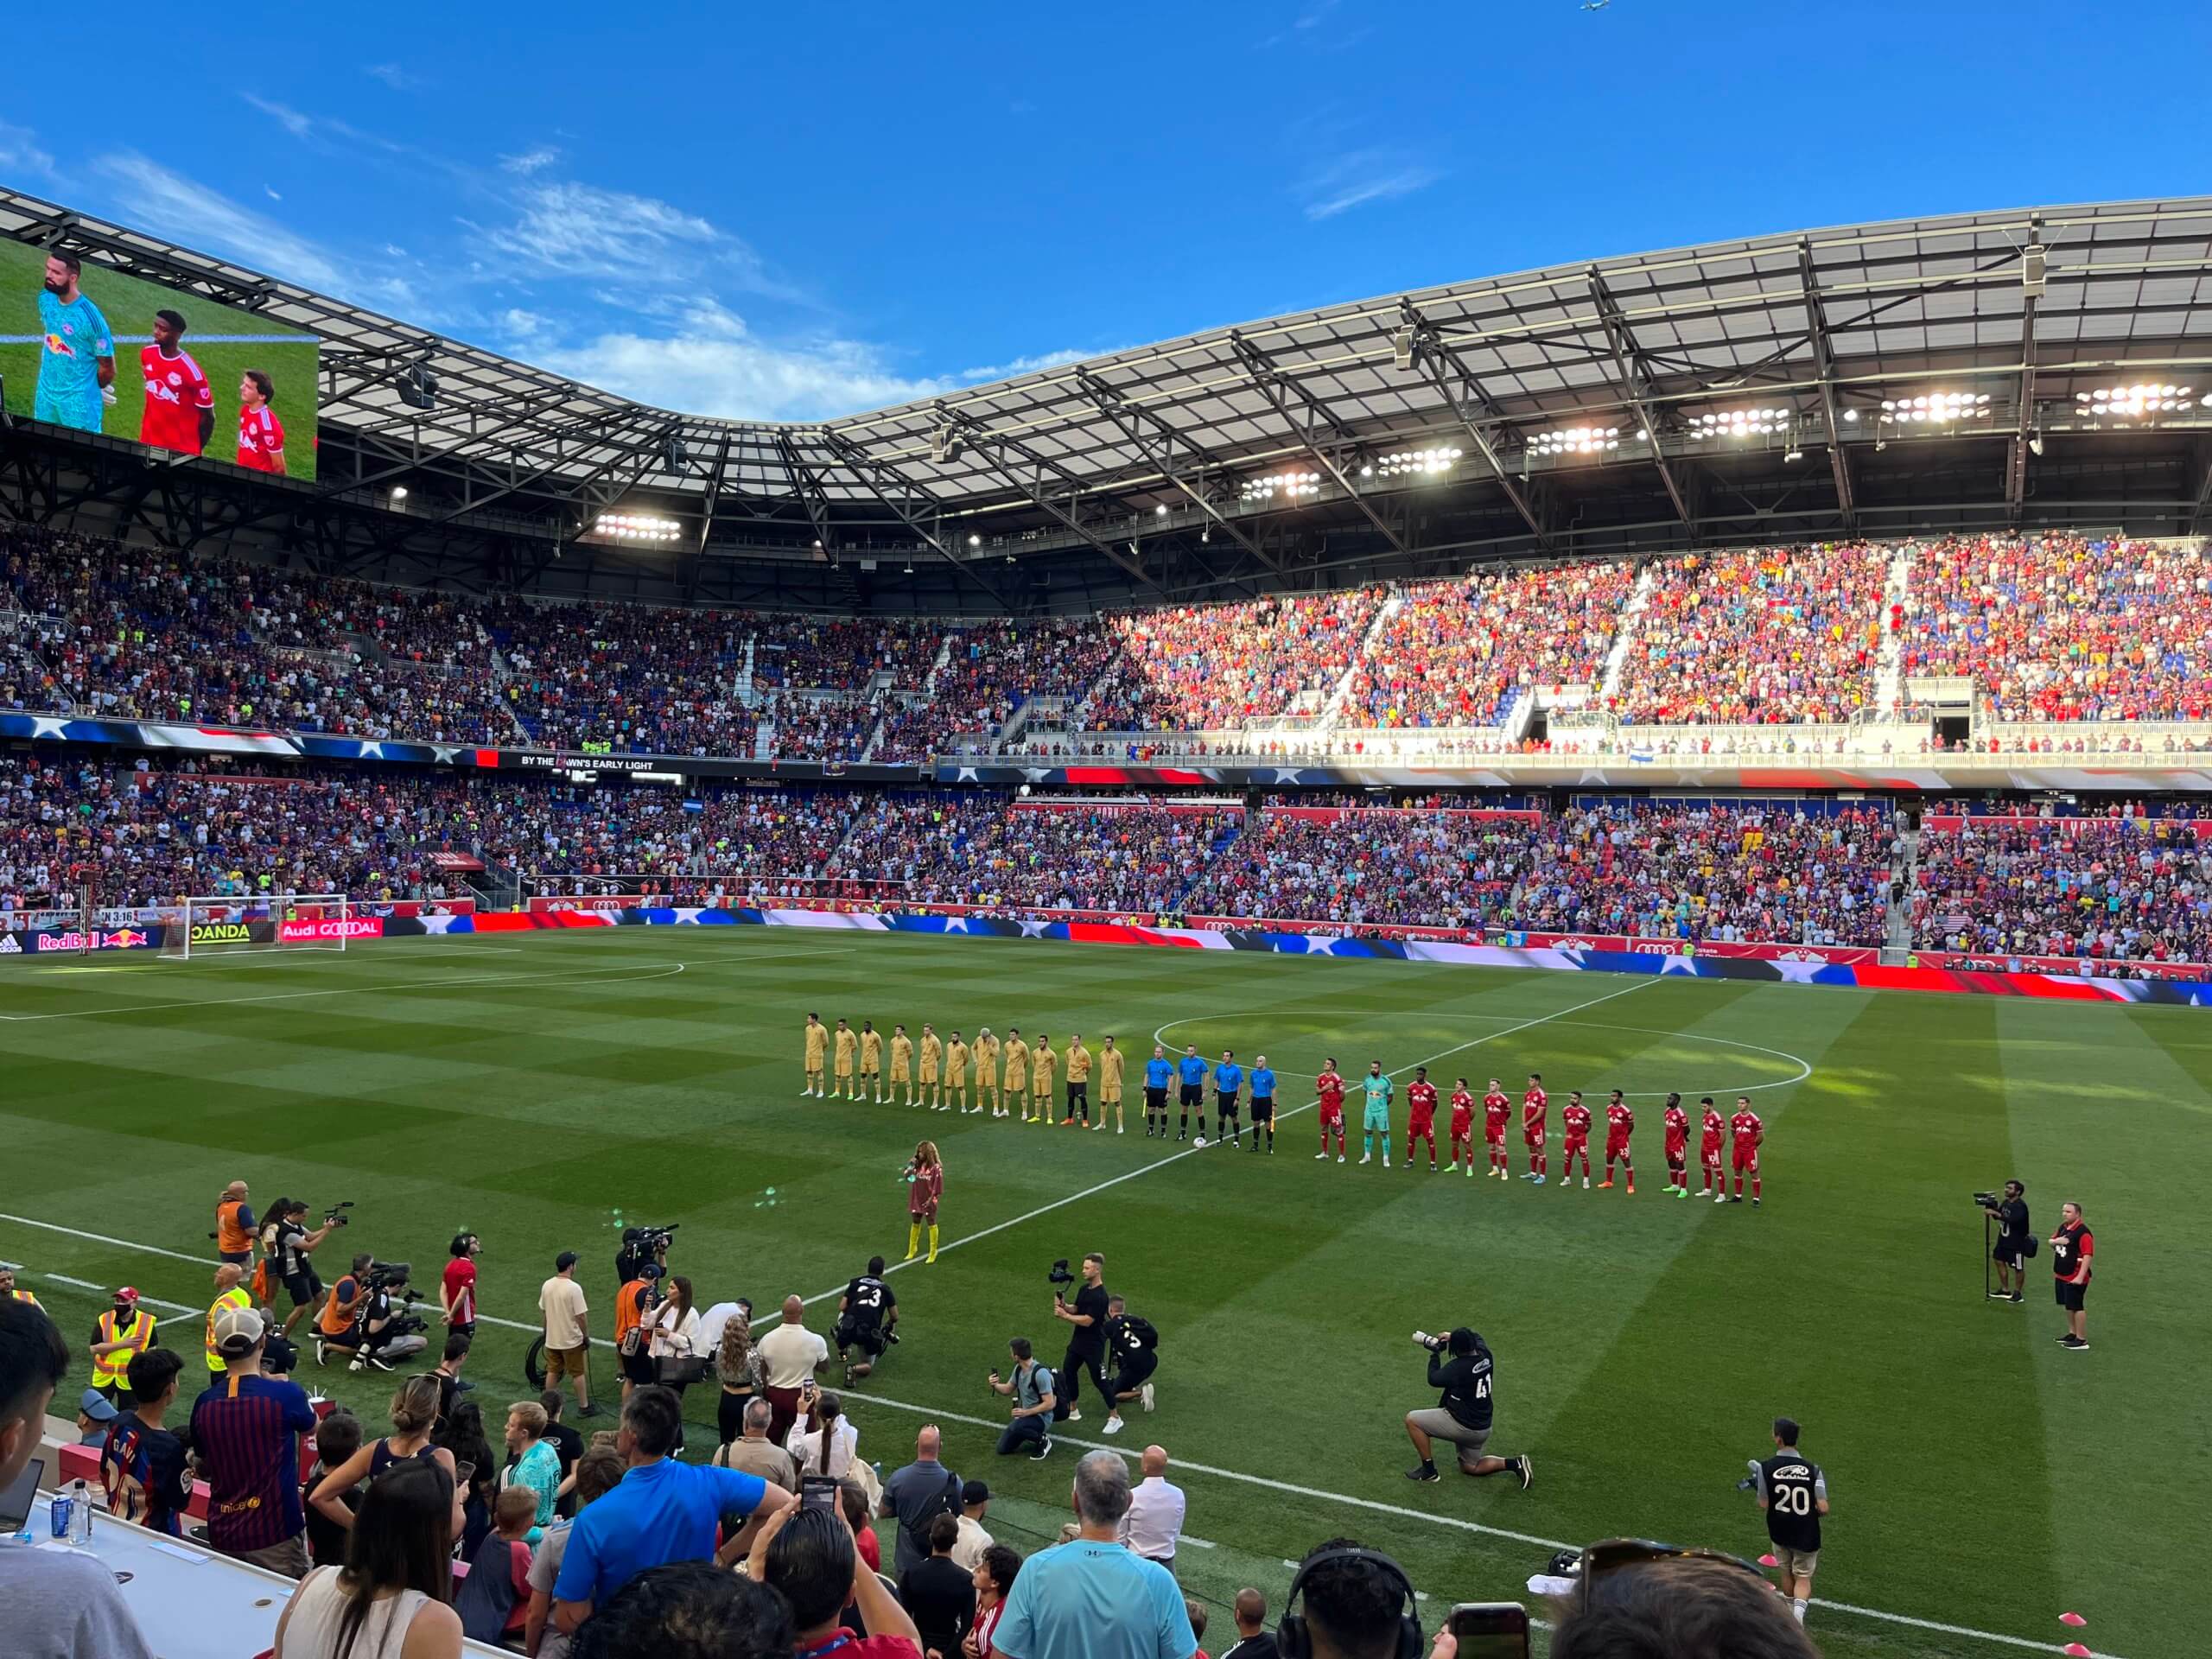 New York Red Bulls, Barcelona friendly successful showing of passion for soccer in amNewYork